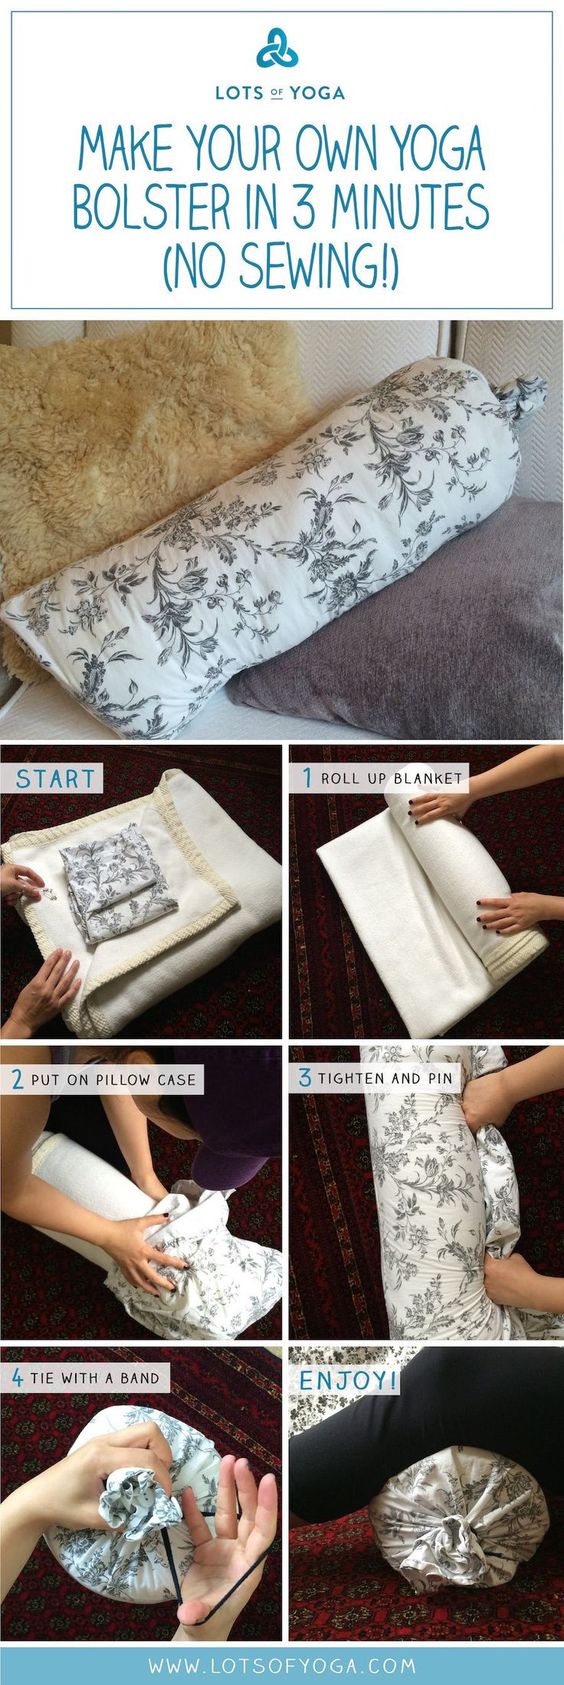 Make your own yoga bolster instructions